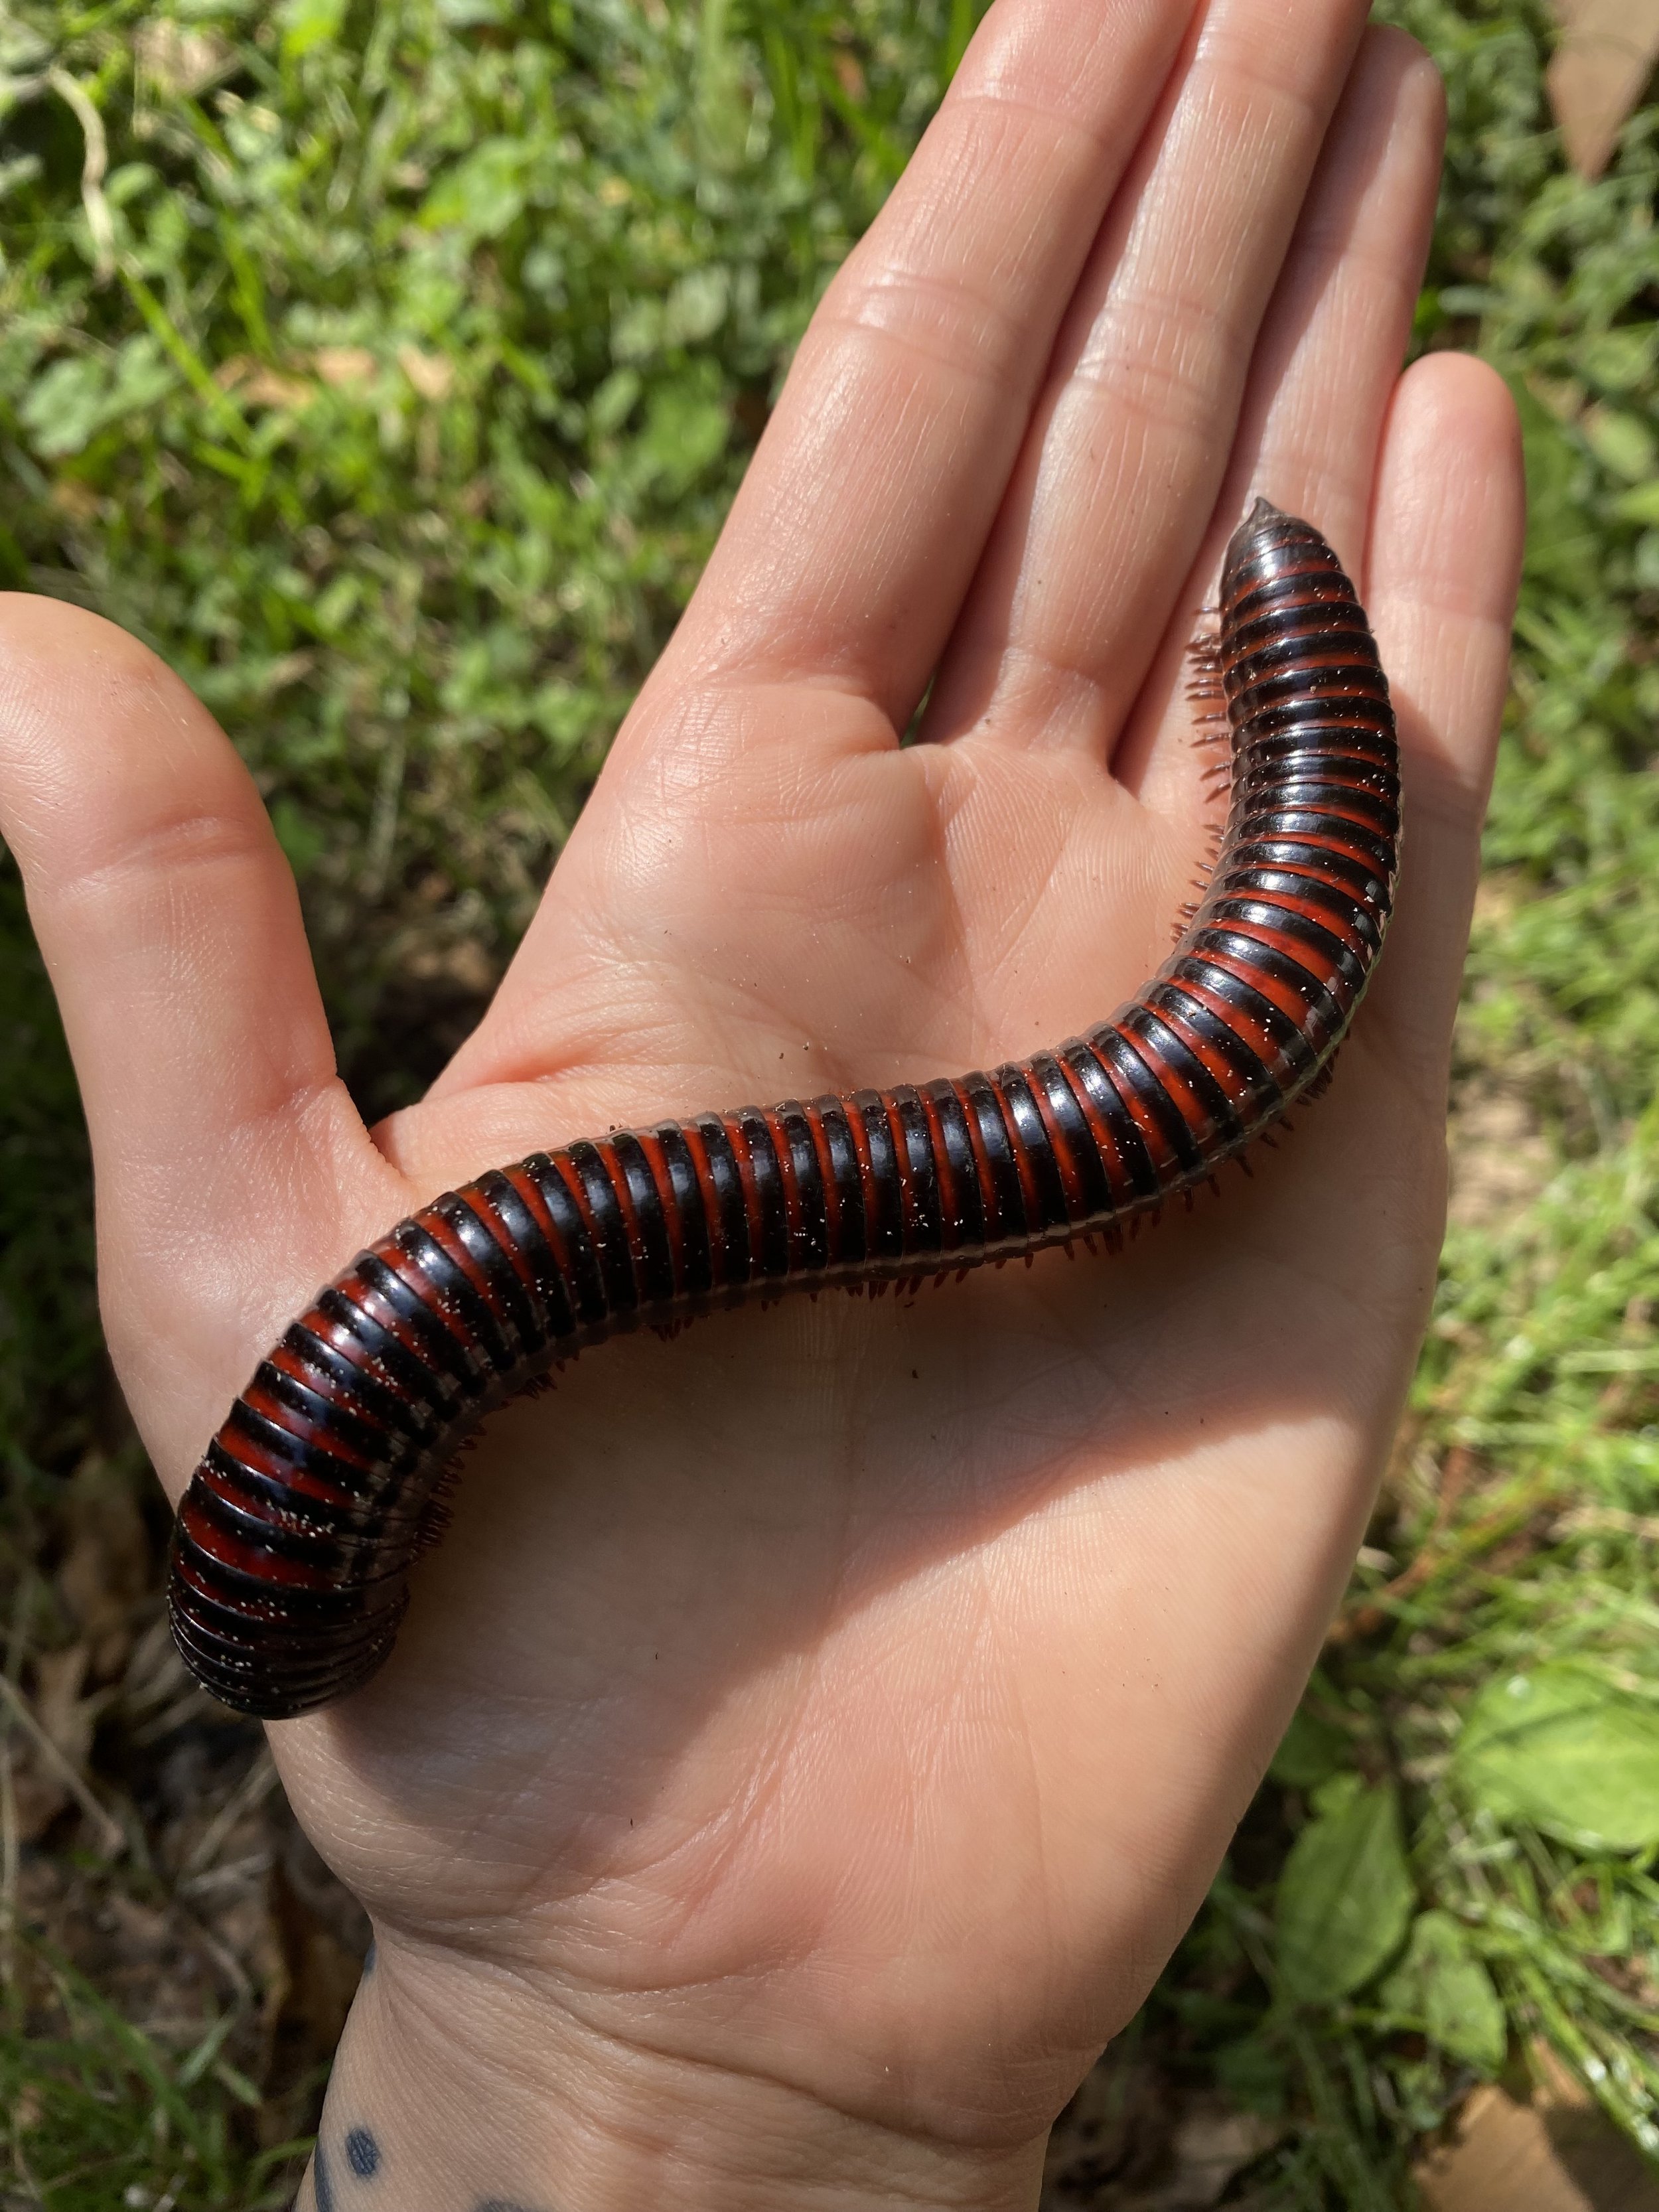 Our Giant Fire Millipede Flame